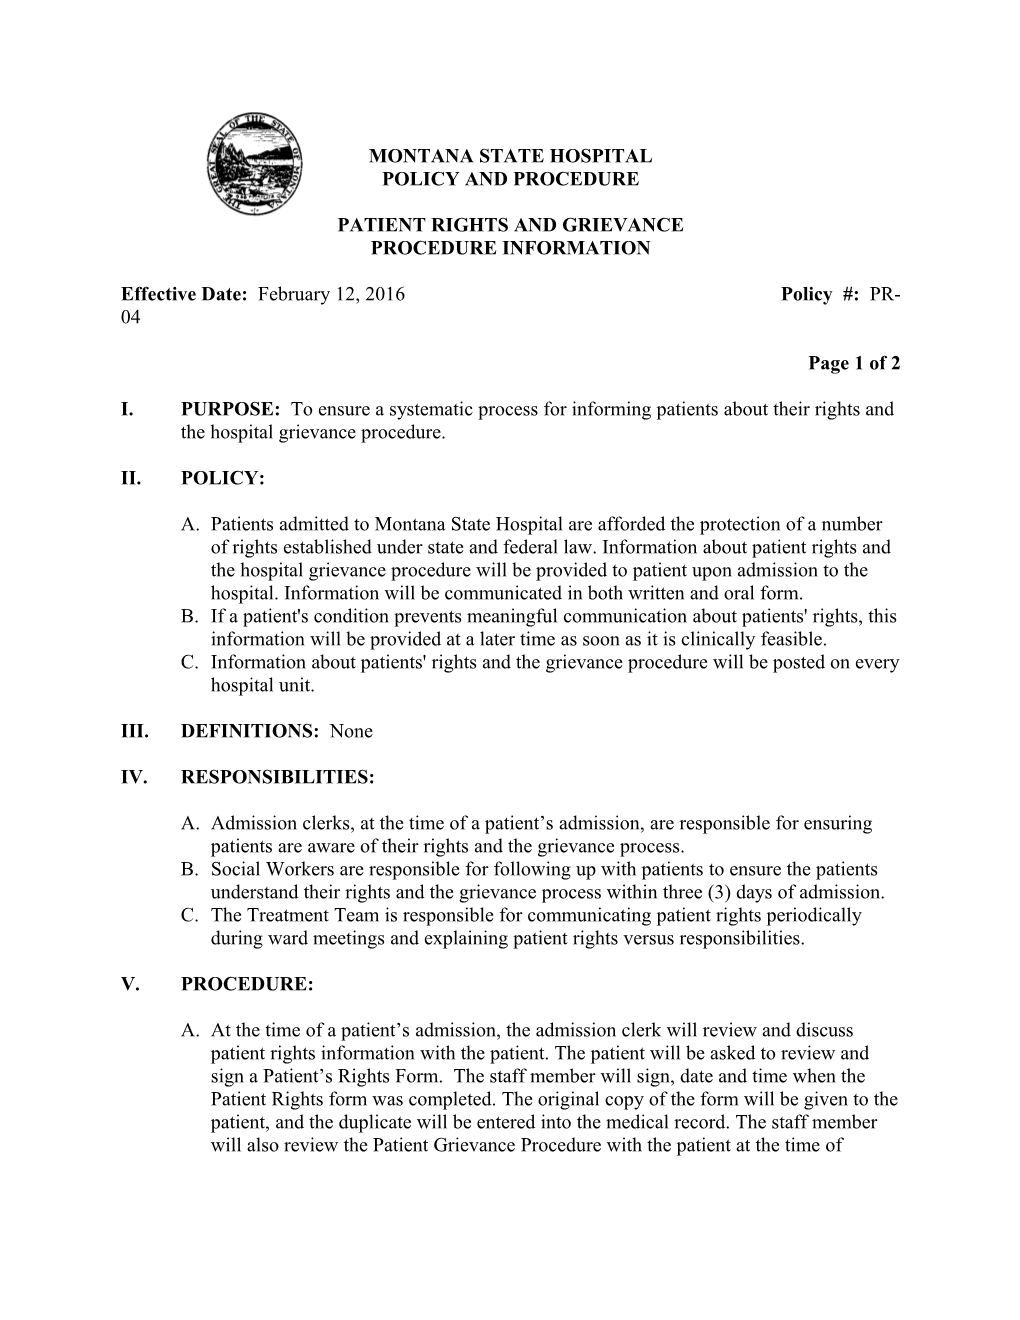 Patient Rights and Grievance Procedure Informationmontana STATE HOSPITAL